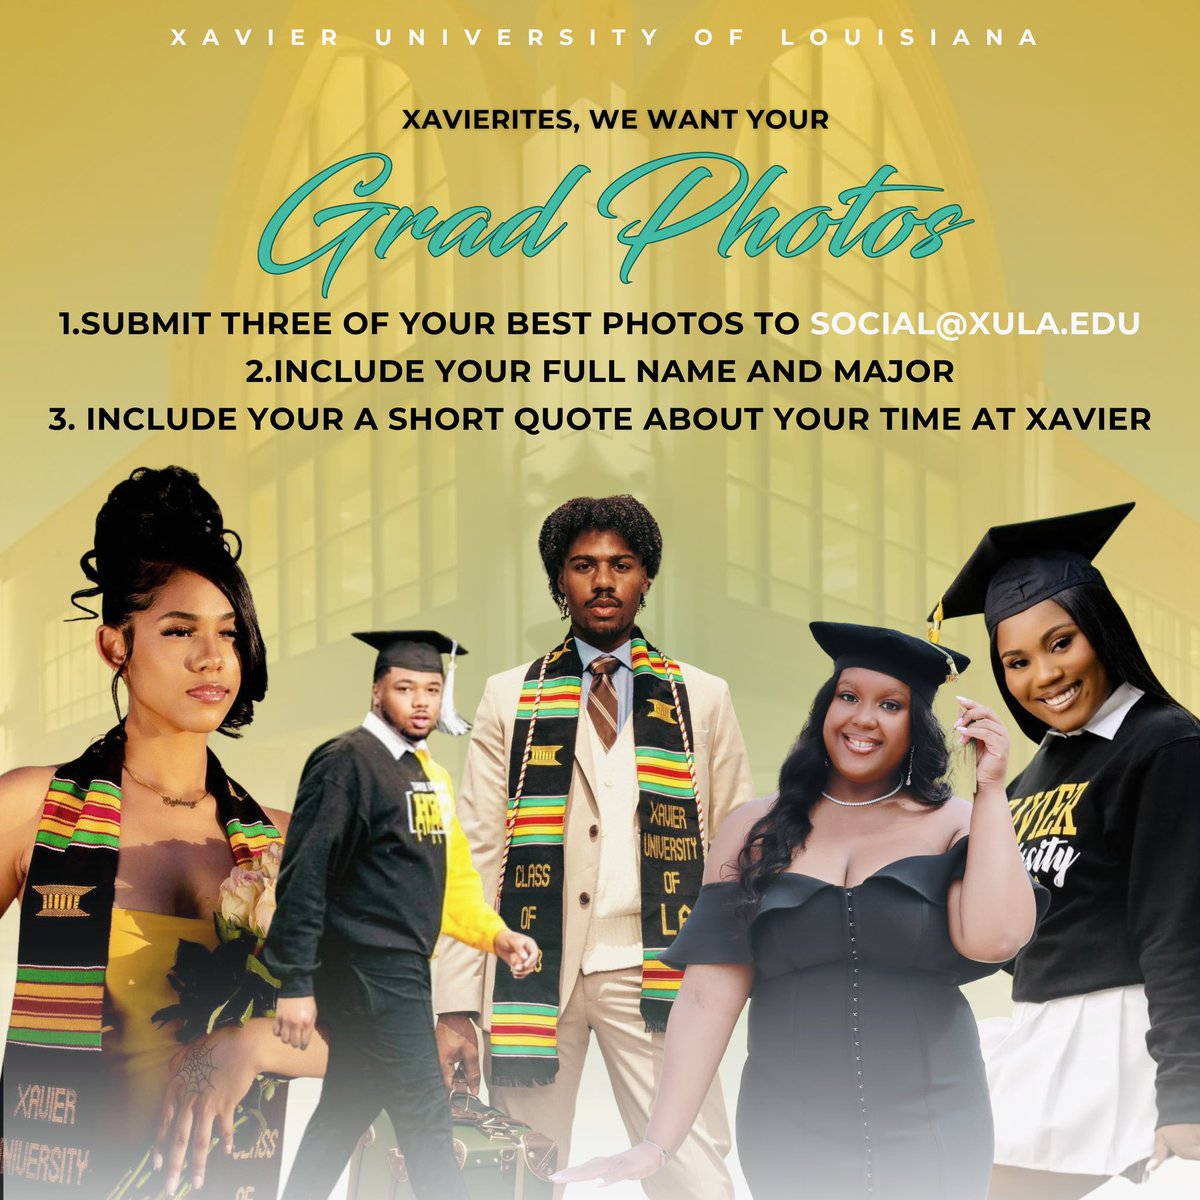 It’s officially GRAD SZN and we already know you all are slaying your graduation photoshoots! 🧑🏿‍🎓 📷 Send us three of your best grad photos for the chance to be featured on Xavier’s social media! See the graphic for information on how to submit. #XULAGRAD Use hashtag #XULAMADE